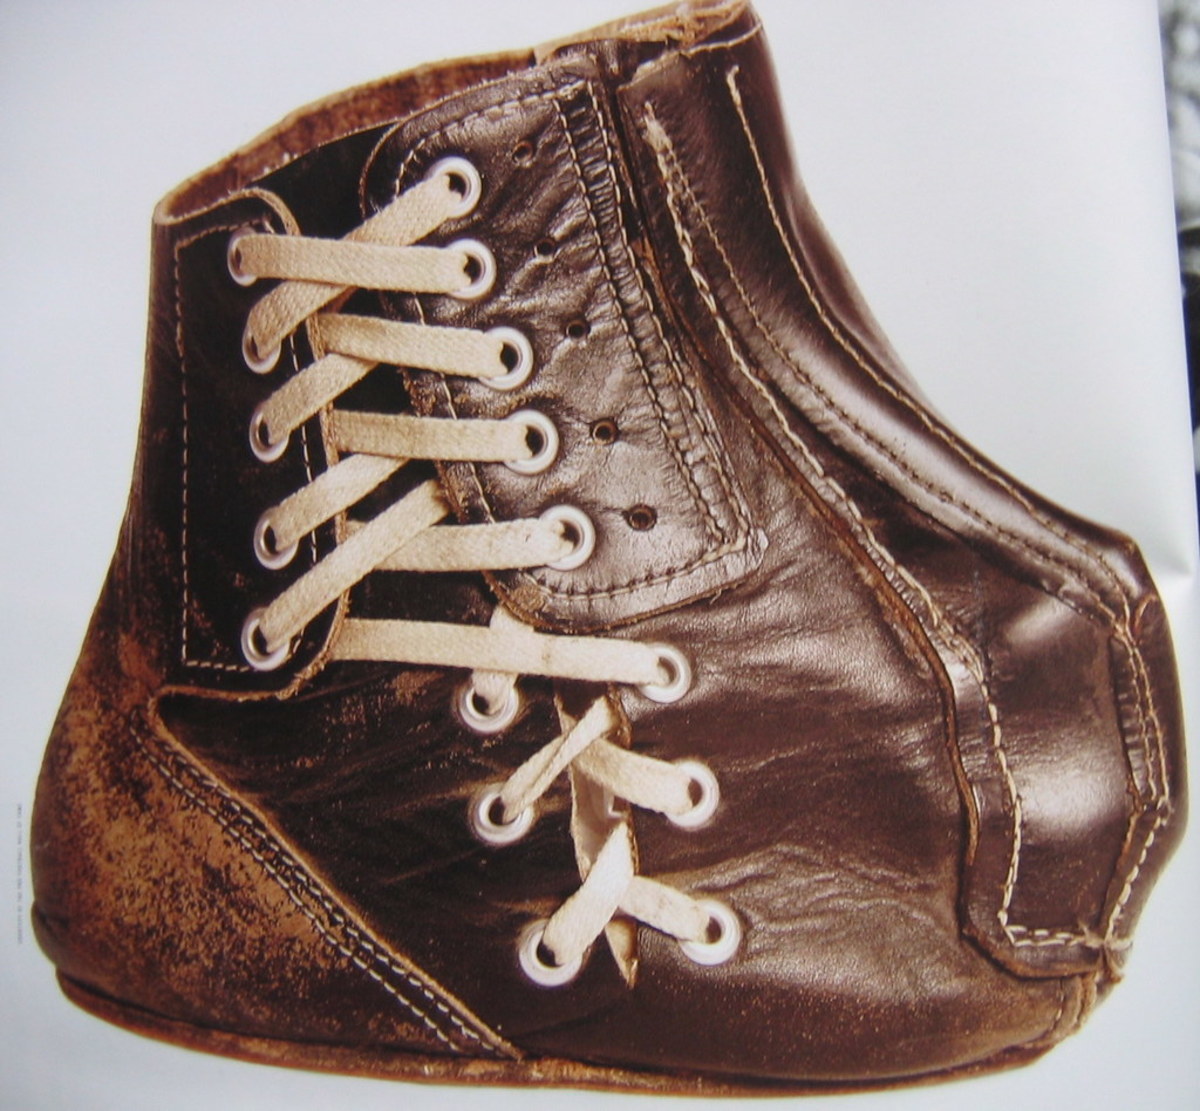 Tom Dempsey's special kicking boot